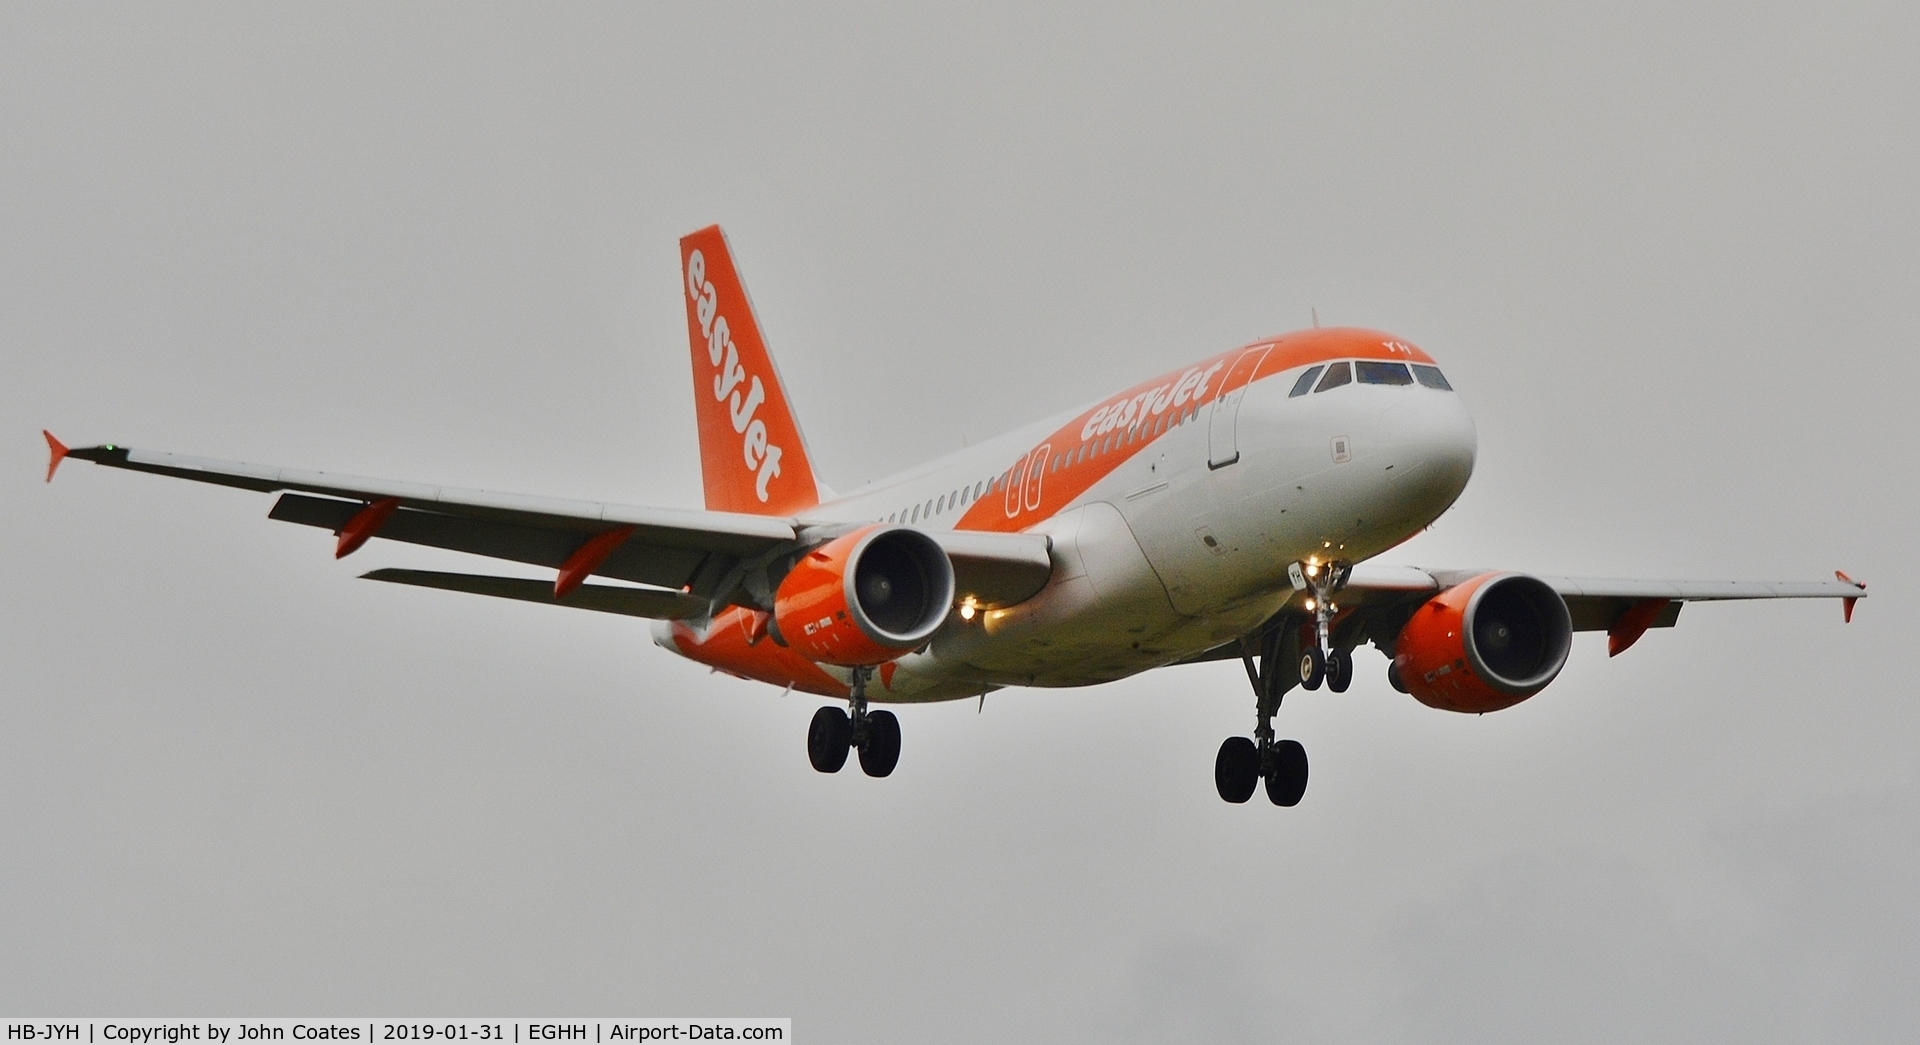 HB-JYH, 2011 Airbus A319-111 C/N 4787, On approach